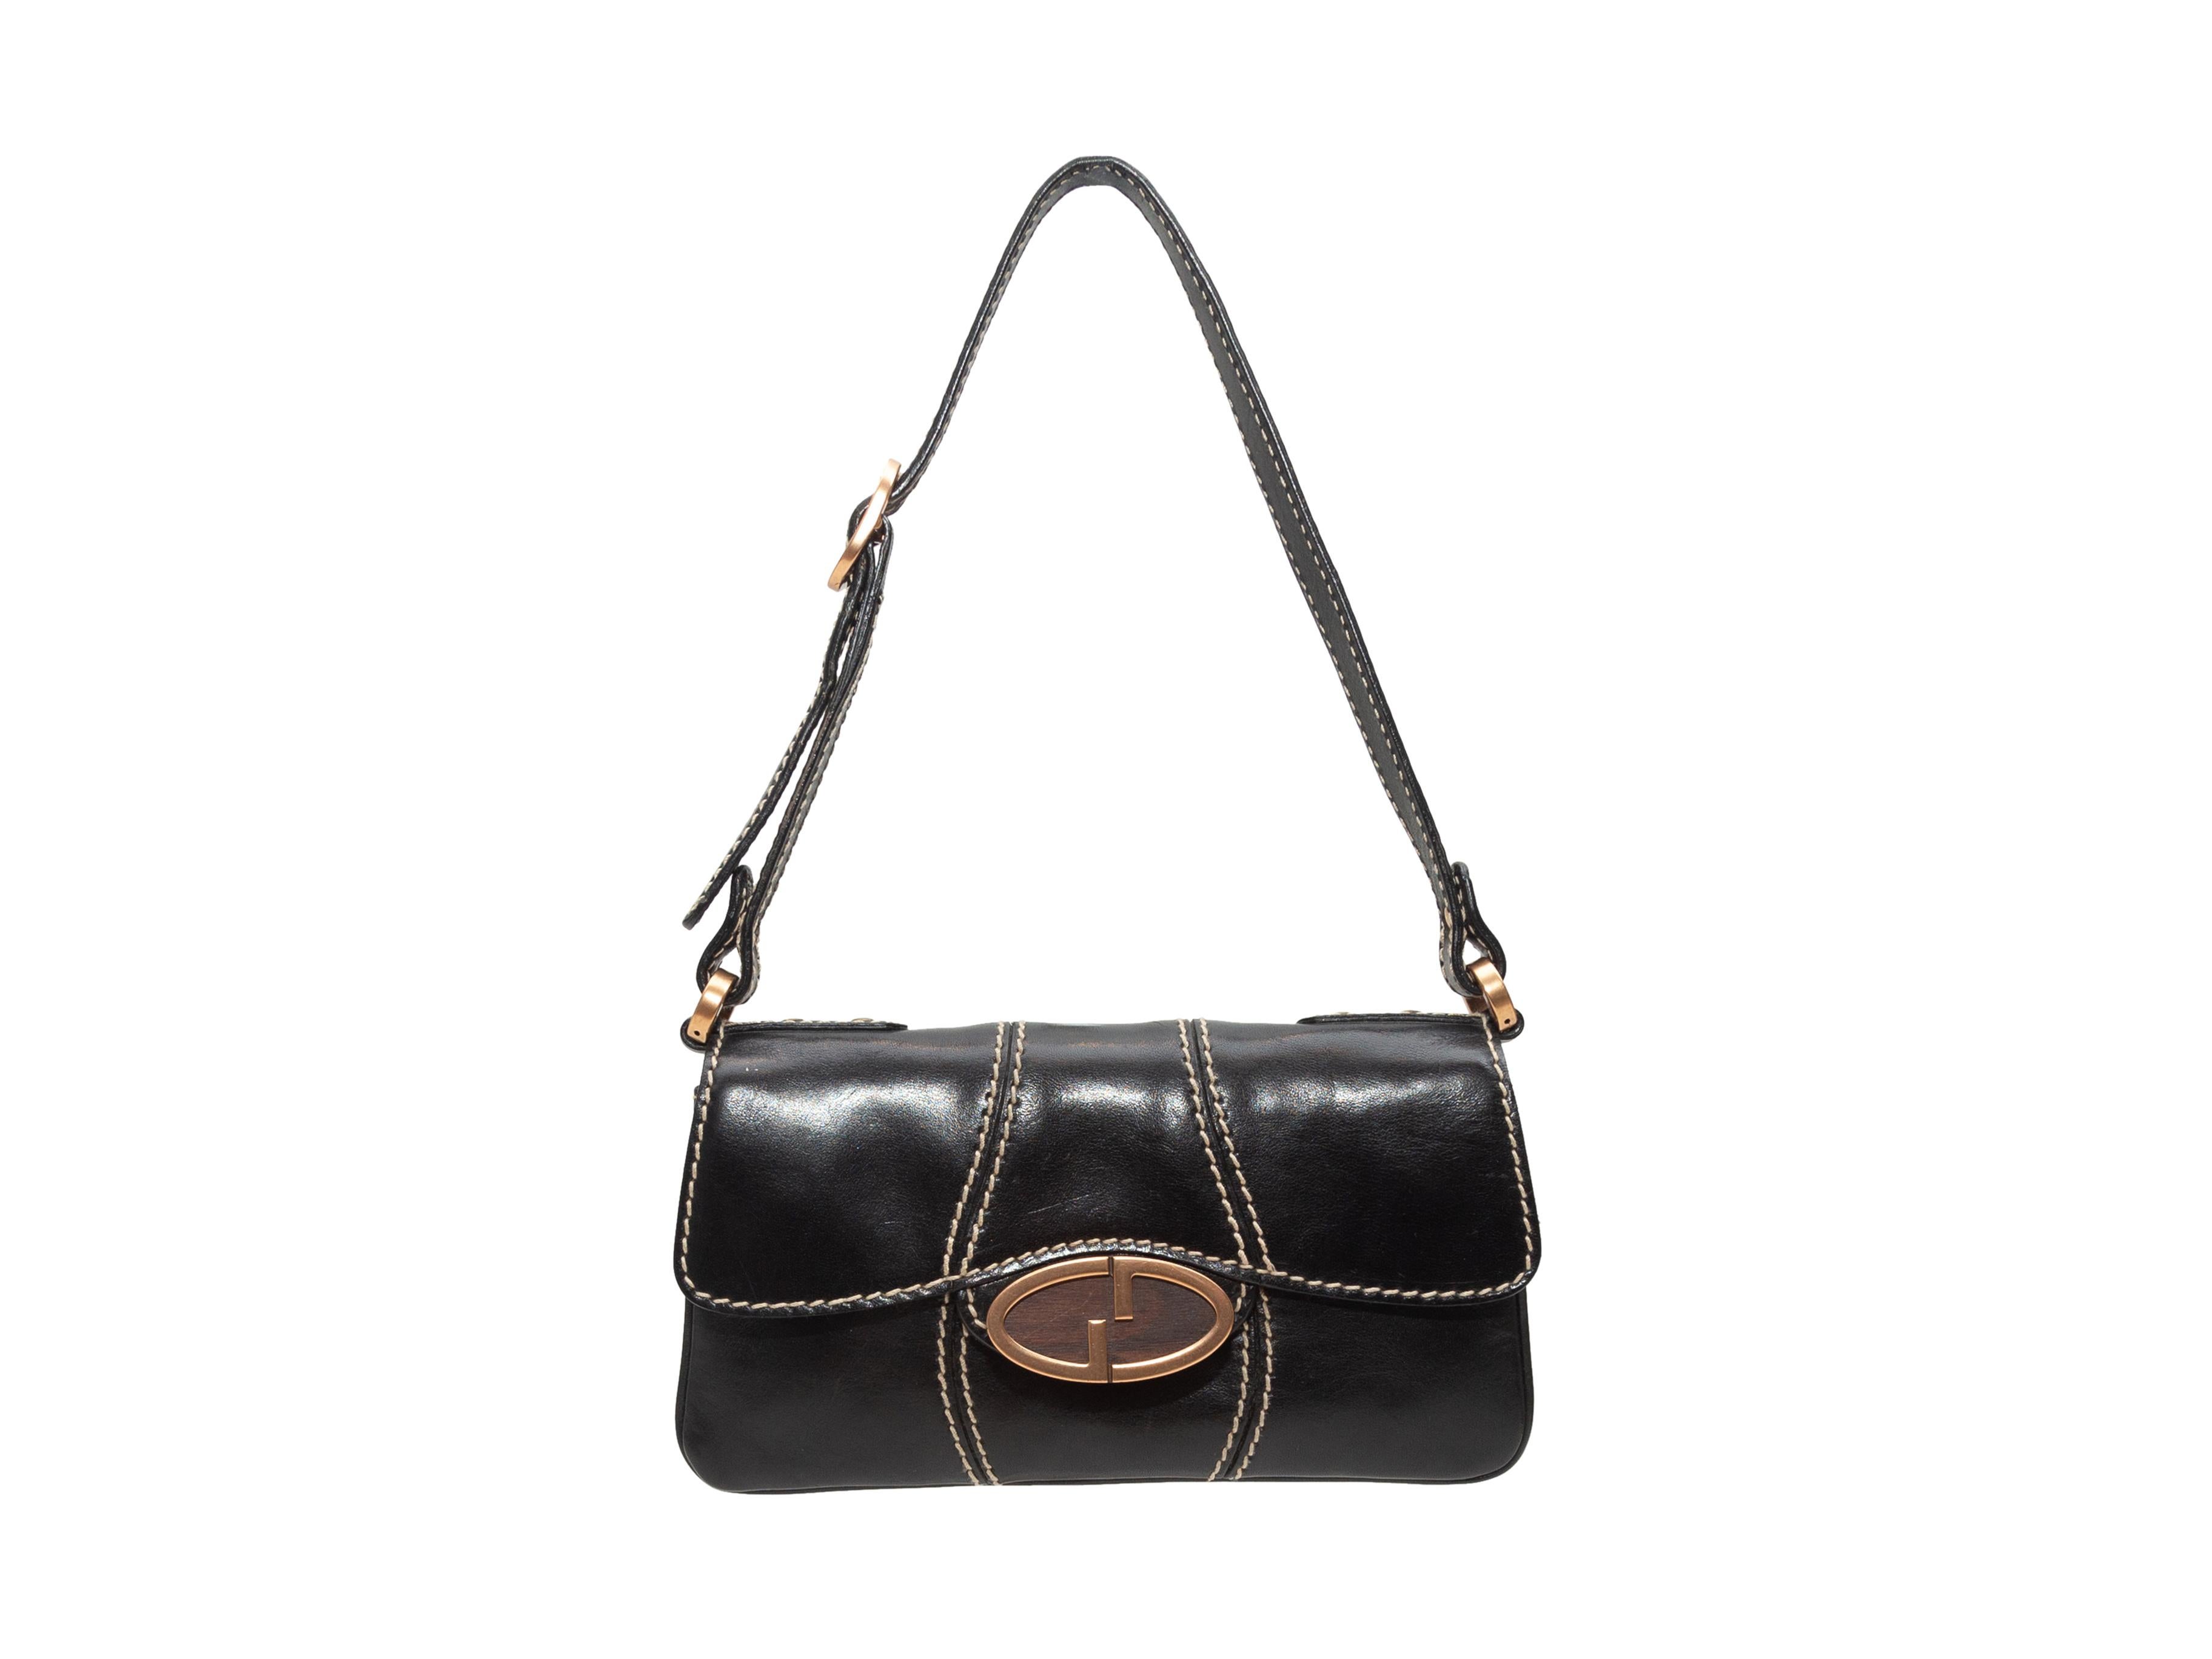 Product details: Vintage Black Gucci Mini Leather Shoulder Bag. This bag features a leather body, gold-tone hardware, contrast stitching, a single flat strap, and a GG closure at the front flap. 7.5